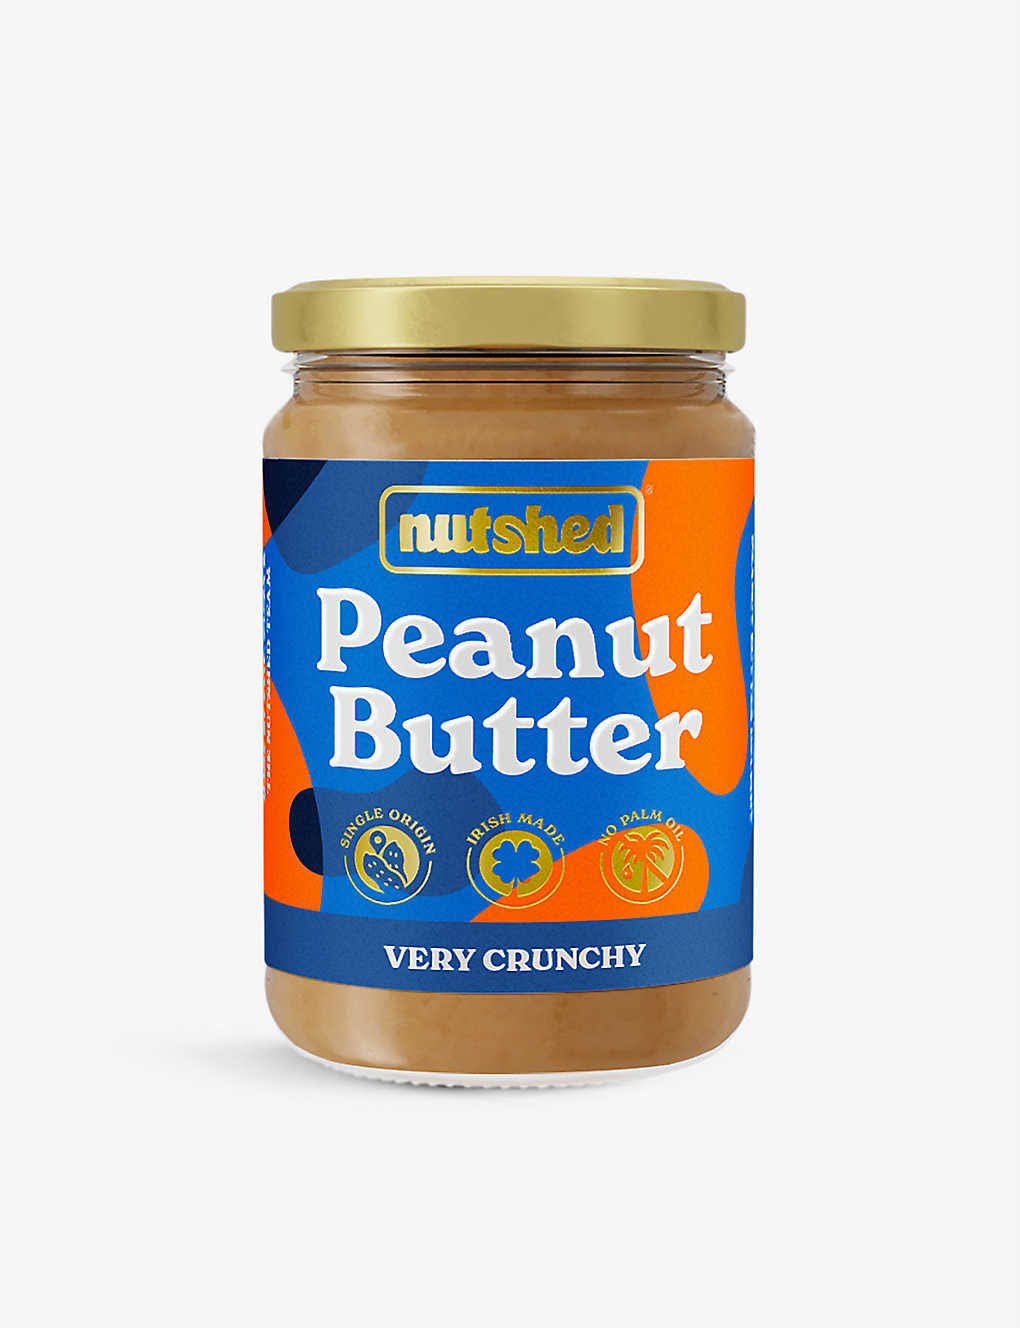 Condiments & Preserves Nutshed Very Crunchy Peanut Butter 290g